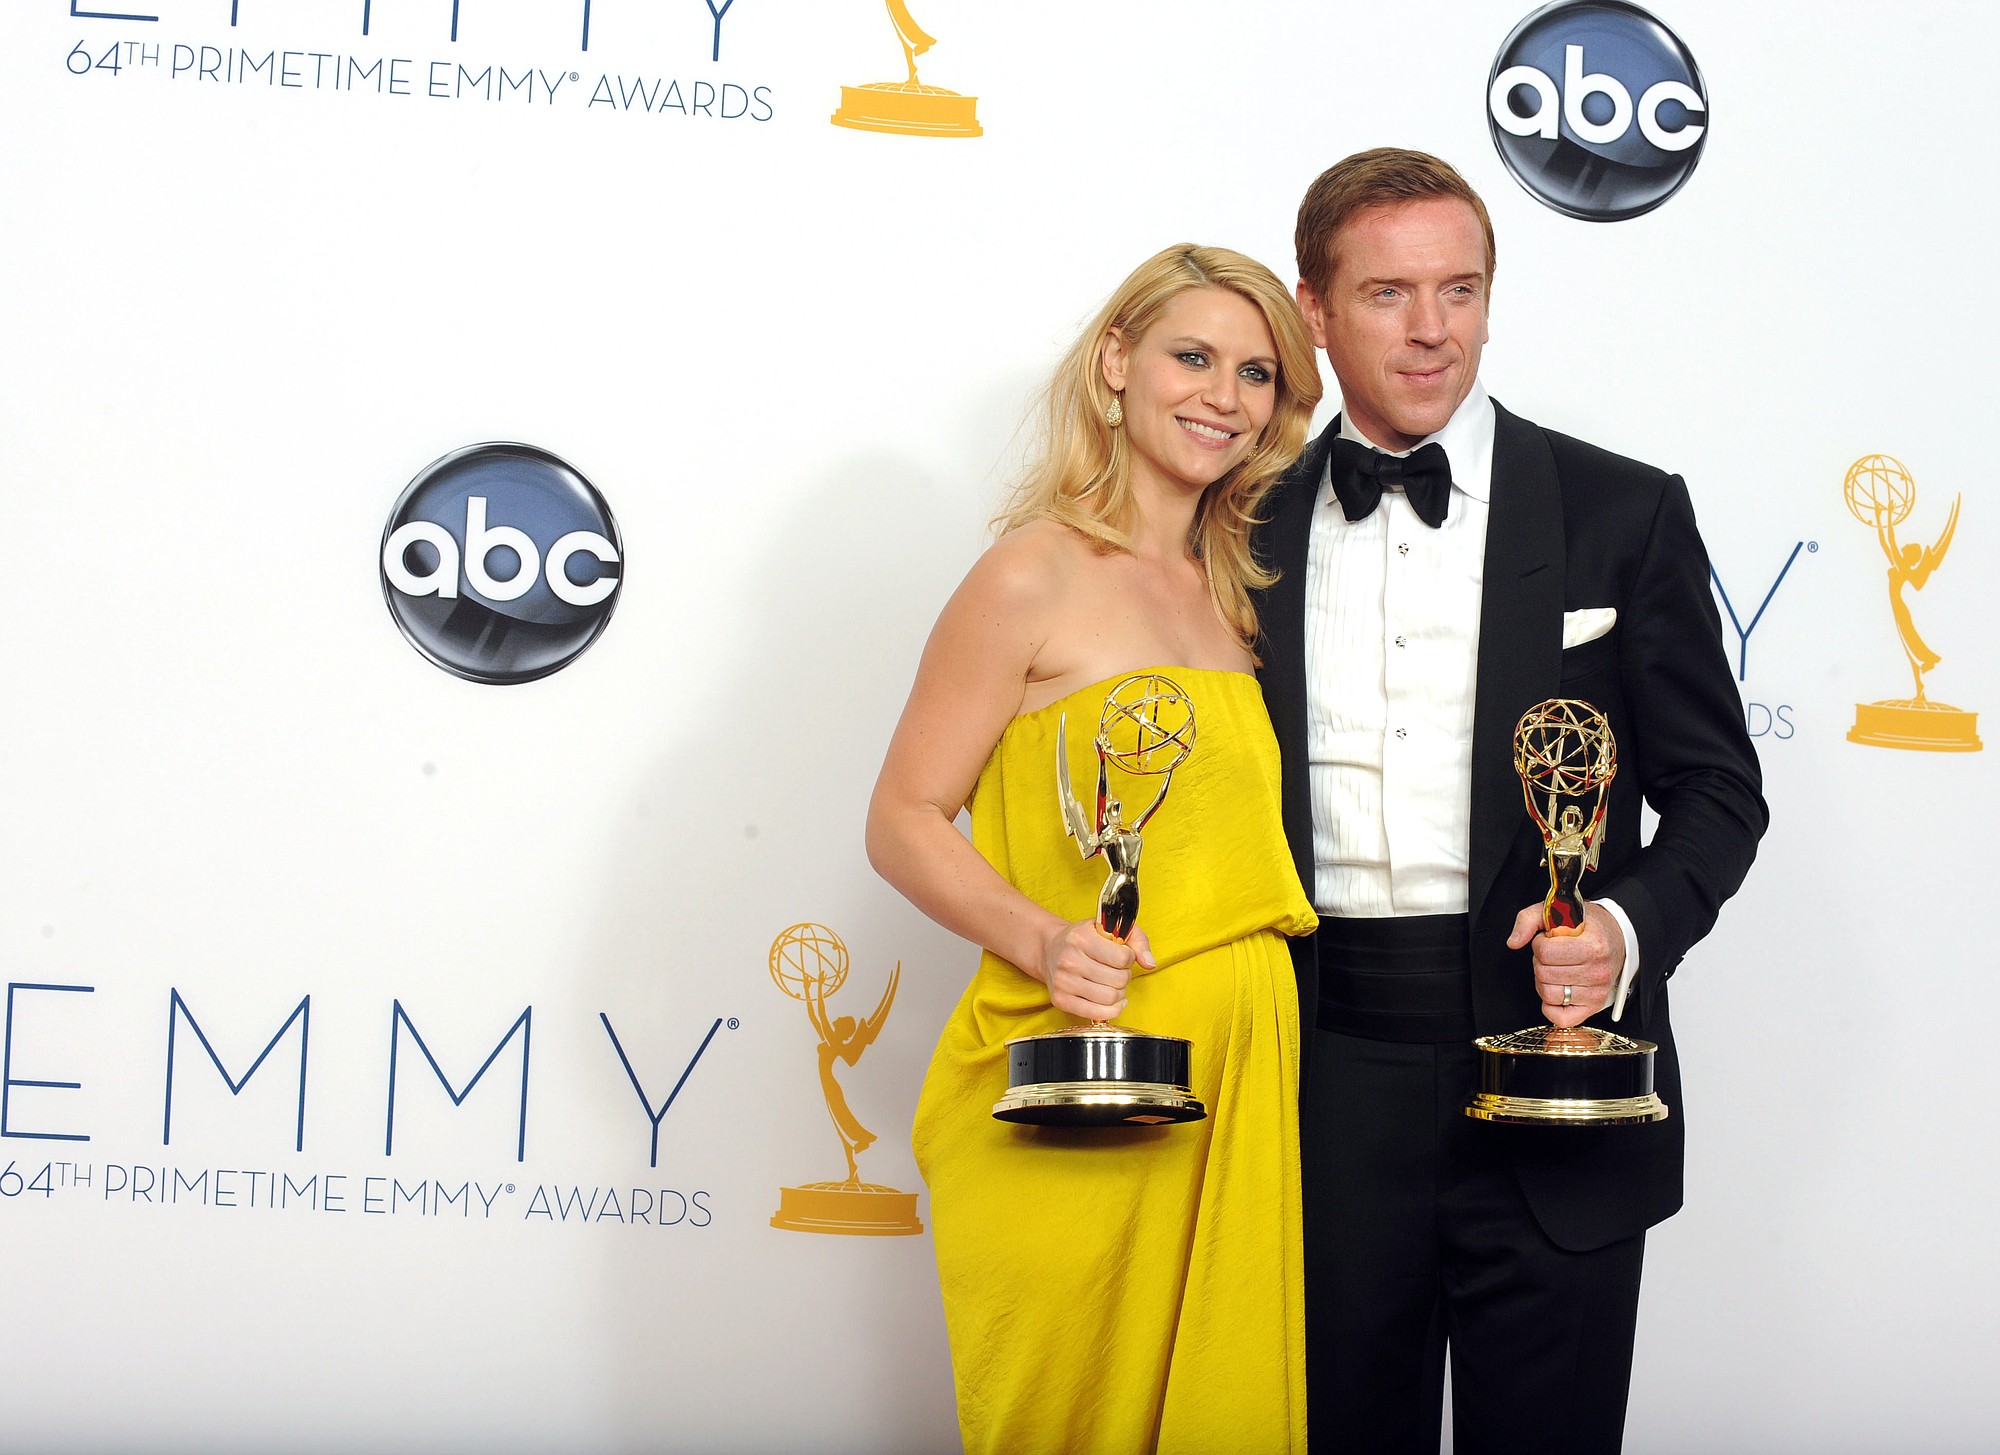 Damian Lewis and Claire Danes each won Emmys for a lead role in 2012 for their performances in &quot;Homeland.&quot; Lewis will play Henry VIII in PBS' &quot;Wolf Hall,&quot; which premieres Sunday.